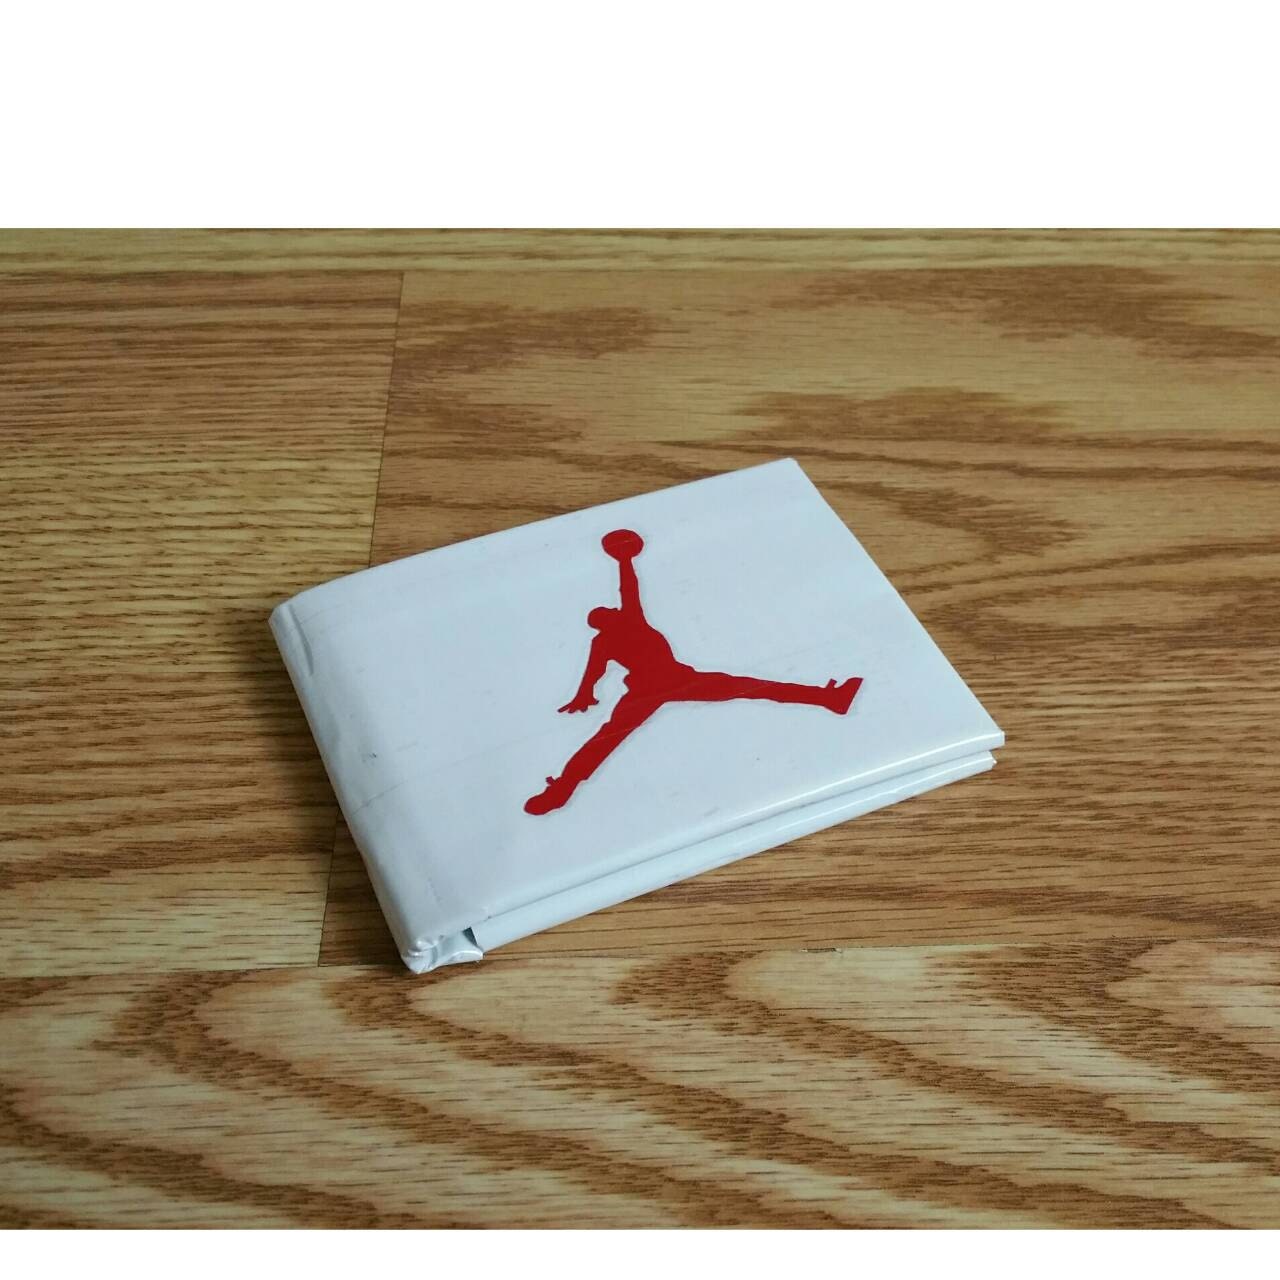 Jordan 3 Duct Tape Bifold Wallet by SimplyDuctD on Etsy